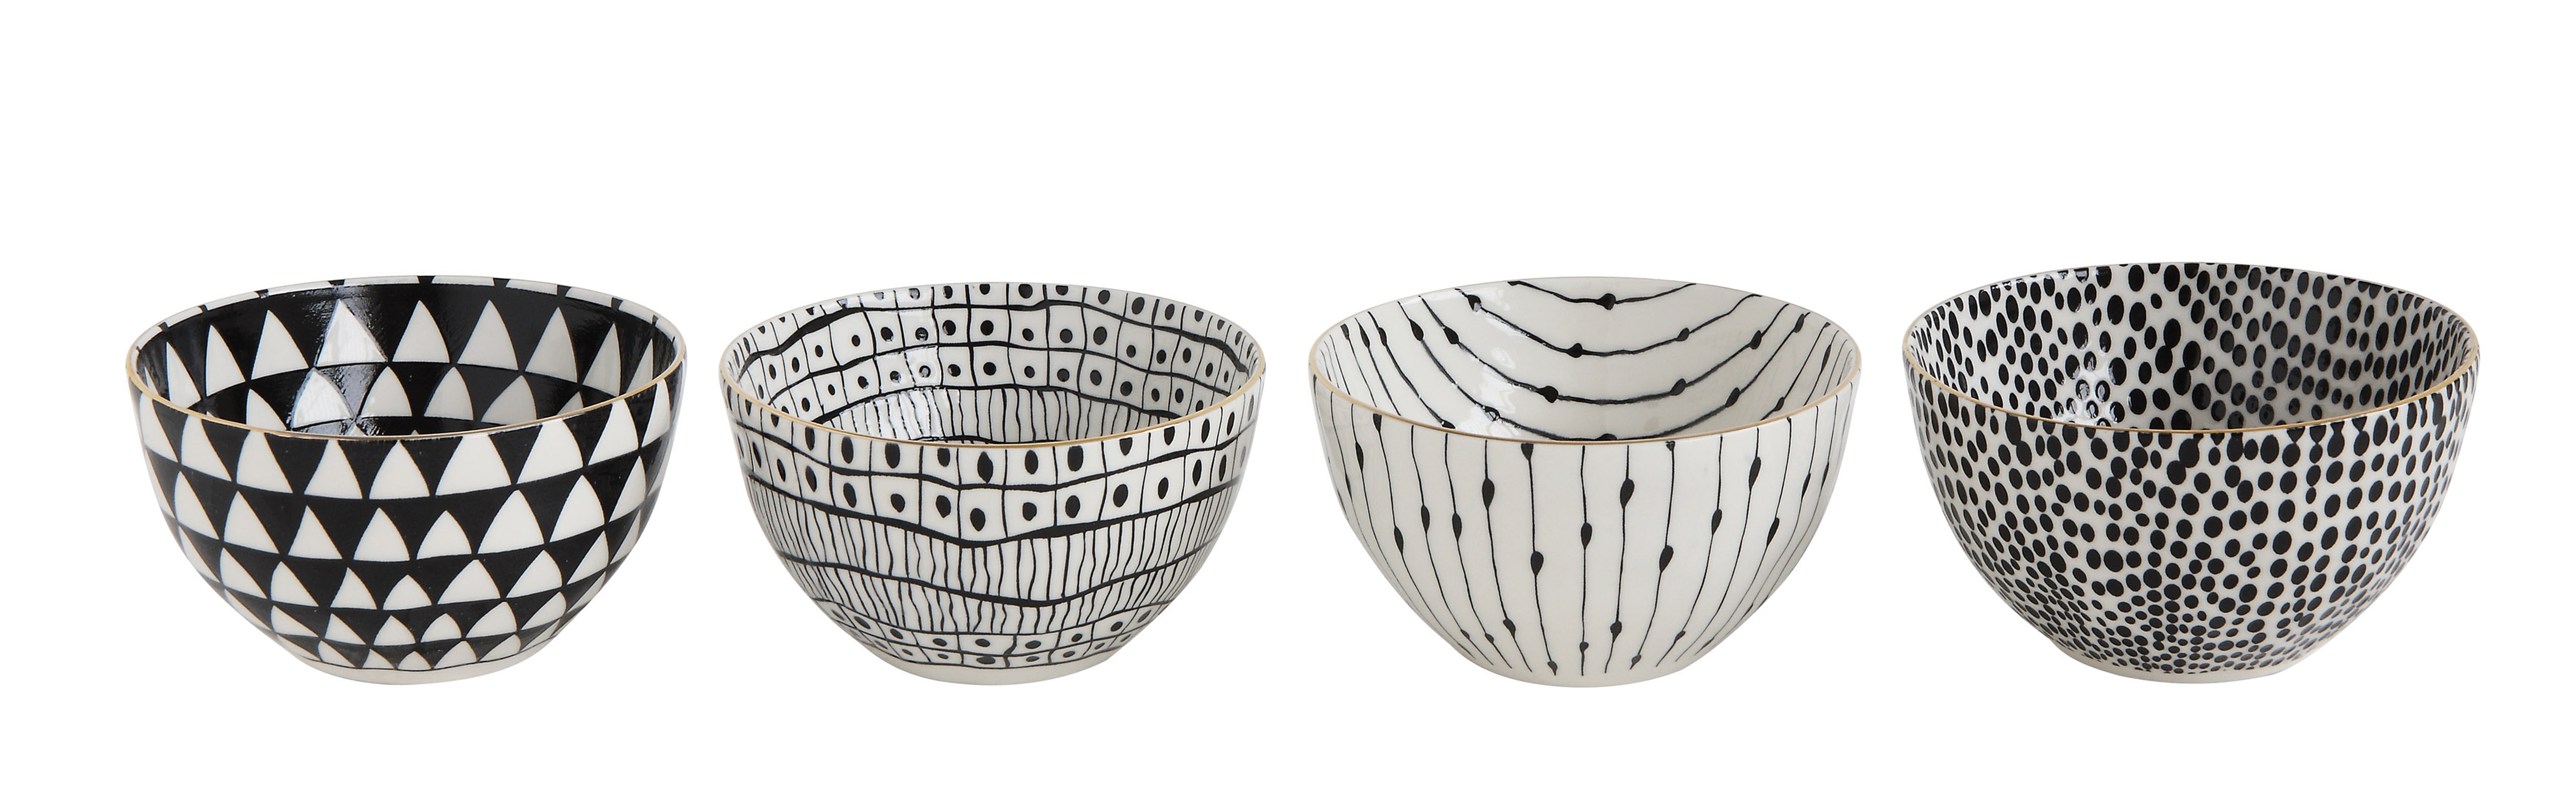 White & Black Bowls with Varying Designs (Set of 4 Designs) - Nomad Home